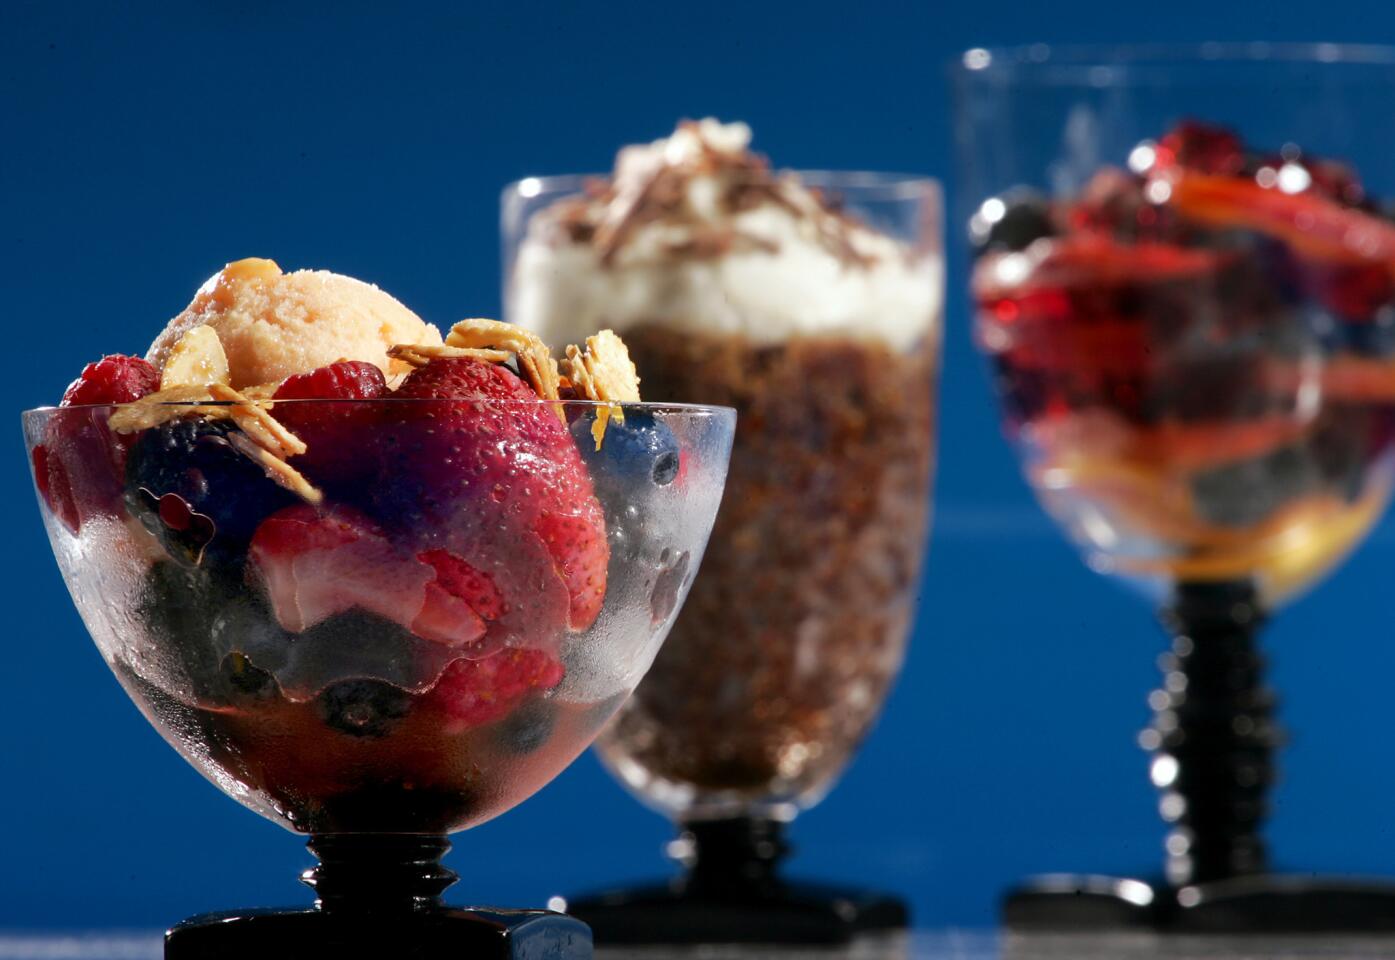 A berry nice mix. Recipe: Berries jubilee with peach sorbet and salted candied almonds